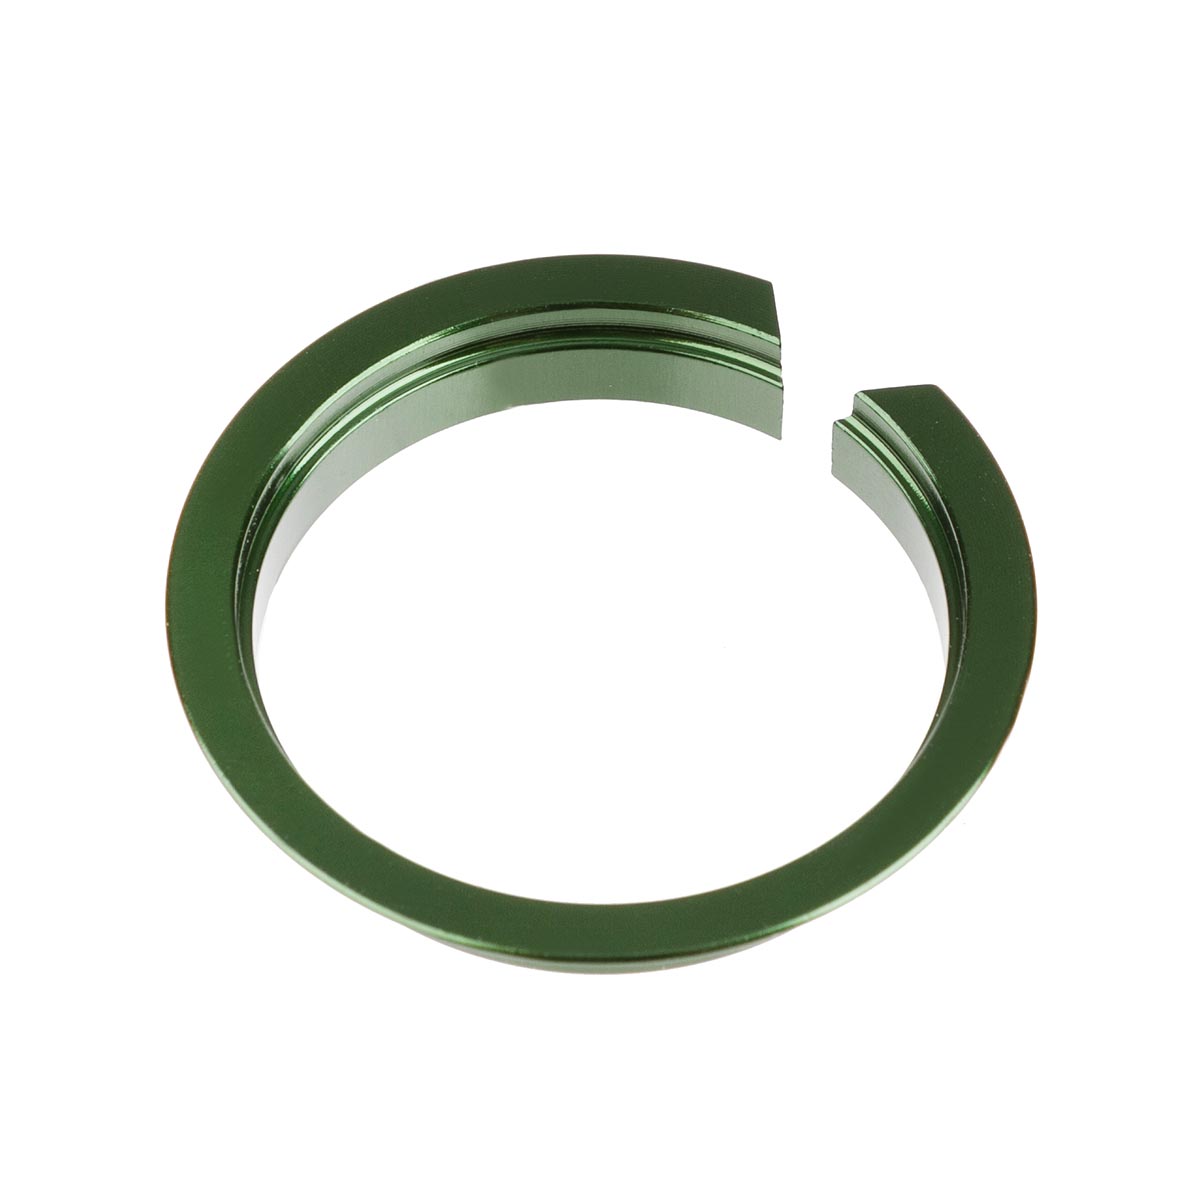 Cane Creek Compression ring 110 41 mm, 1 1/8 Inch